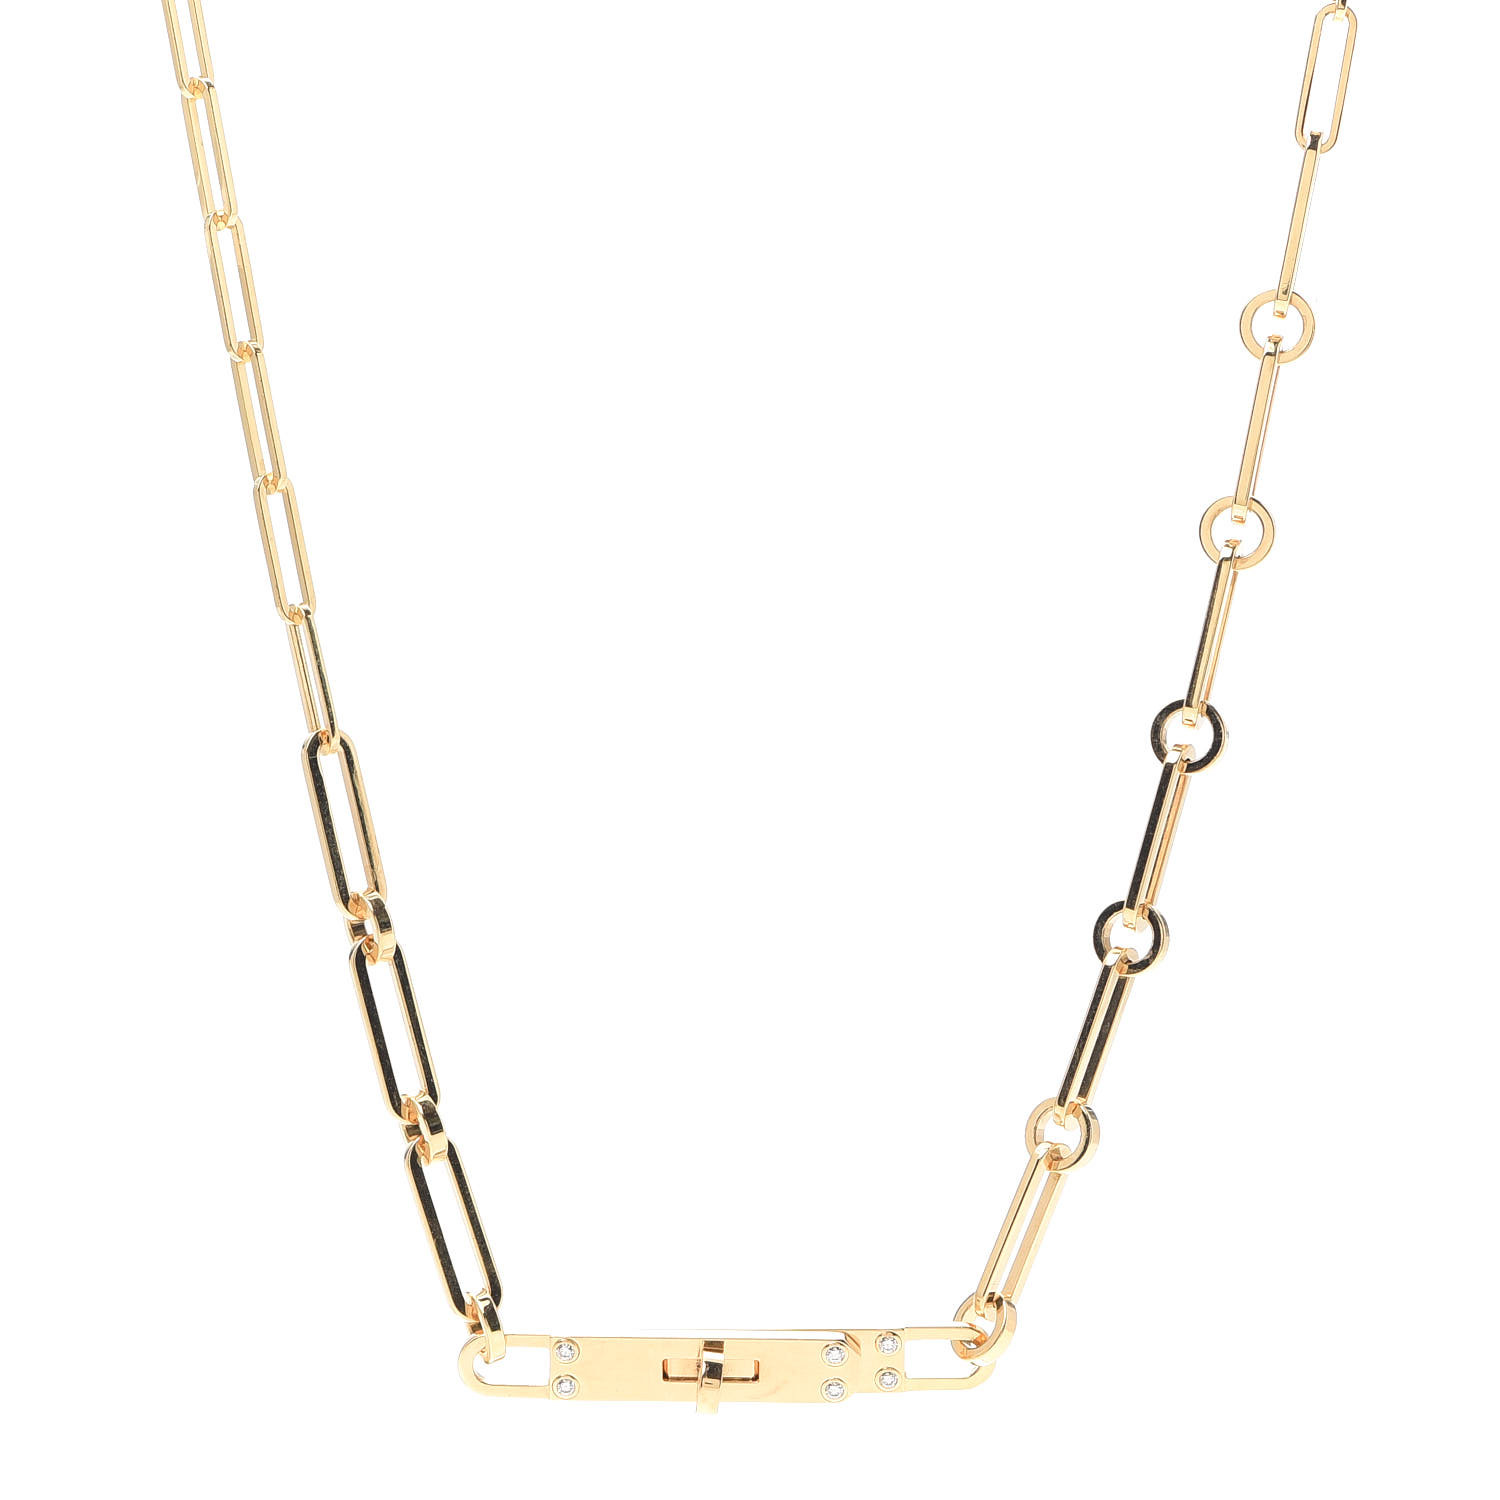 HERMES 18K Yellow Gold Diamond PM Kelly Chaine Double Tour Necklace ...